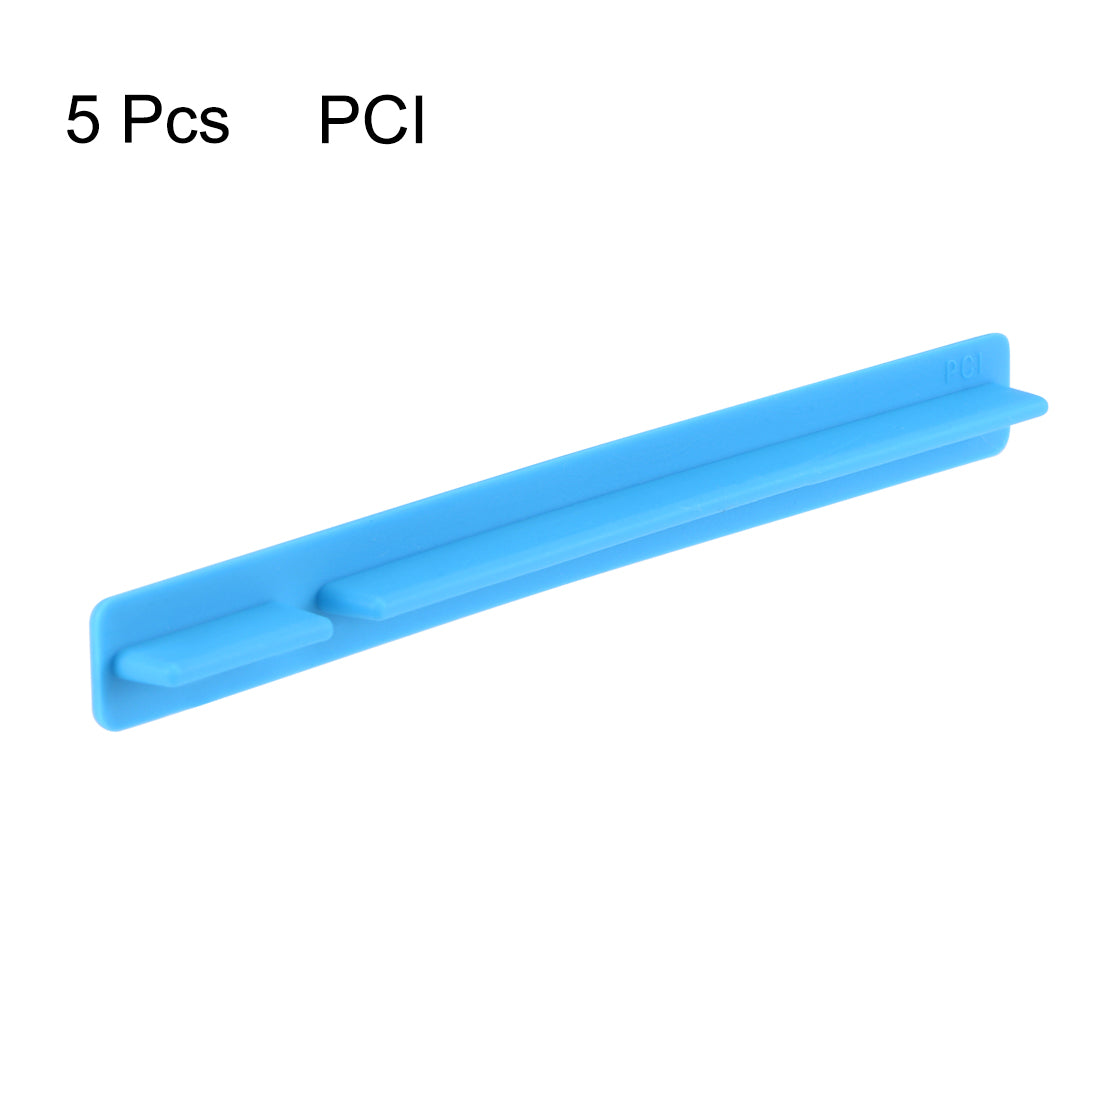 uxcell Uxcell 5pcs PCI Slot Silicone Protectors Anti Dust Cap Cover, Blue